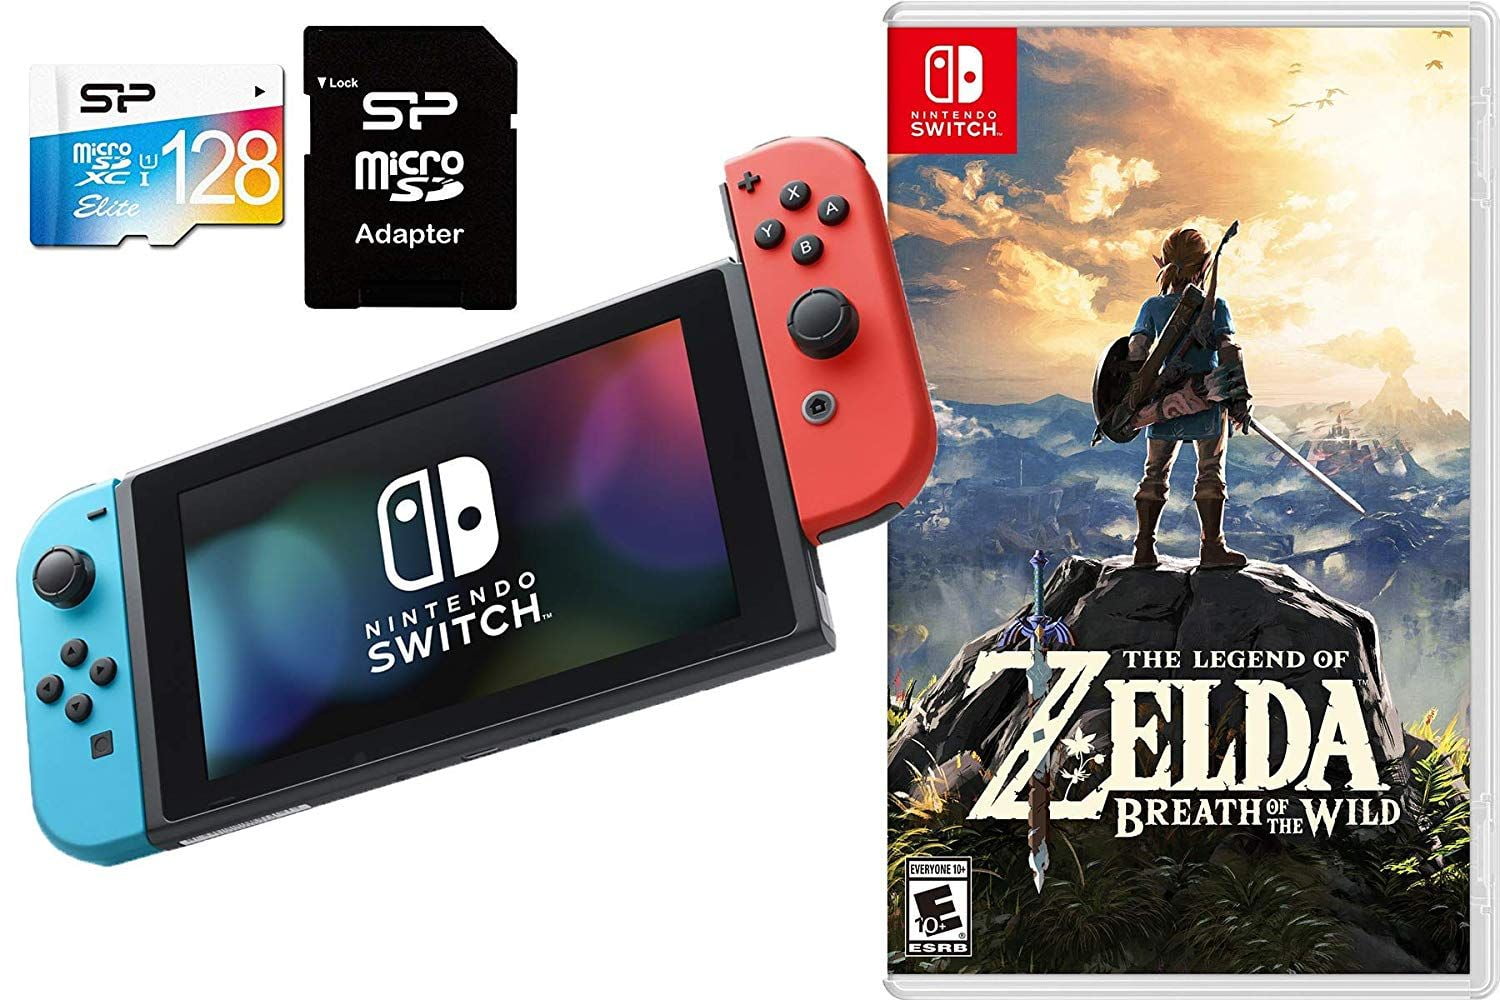 Nintendo Zelda The Legend of Zelda Breath of Wild Bundle: 32GB Nintendo Switch Console with Neon Red and Blue 128GB SD Card w/ Card Reader, and The Legend of